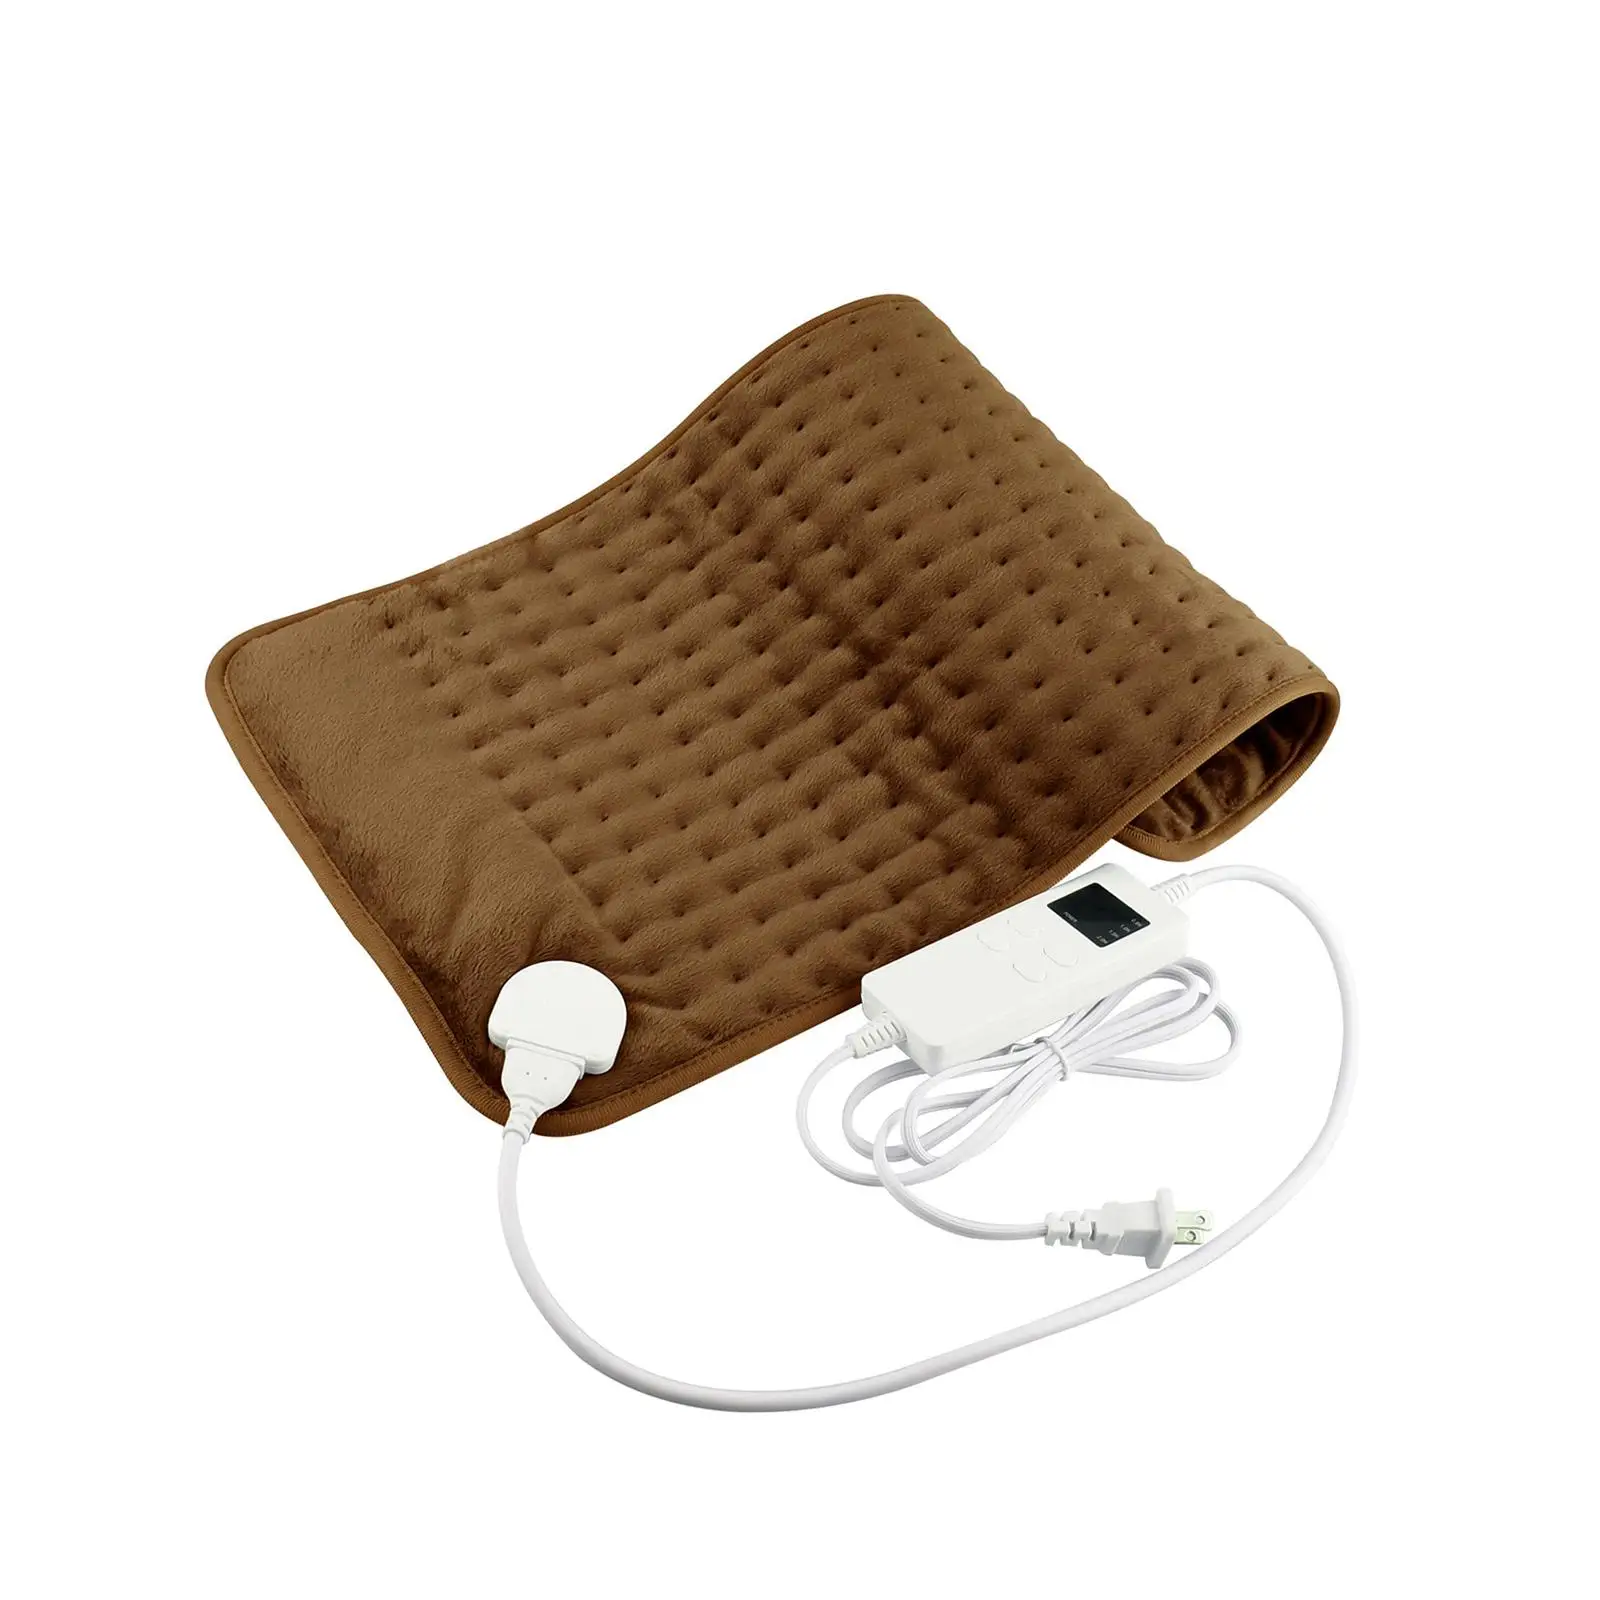 Warm Electric Heating Pad Detachable Fast Heating Auto Shut Off Winter Gifts LED Display Soft Heated Blanket Mat for Waists Legs